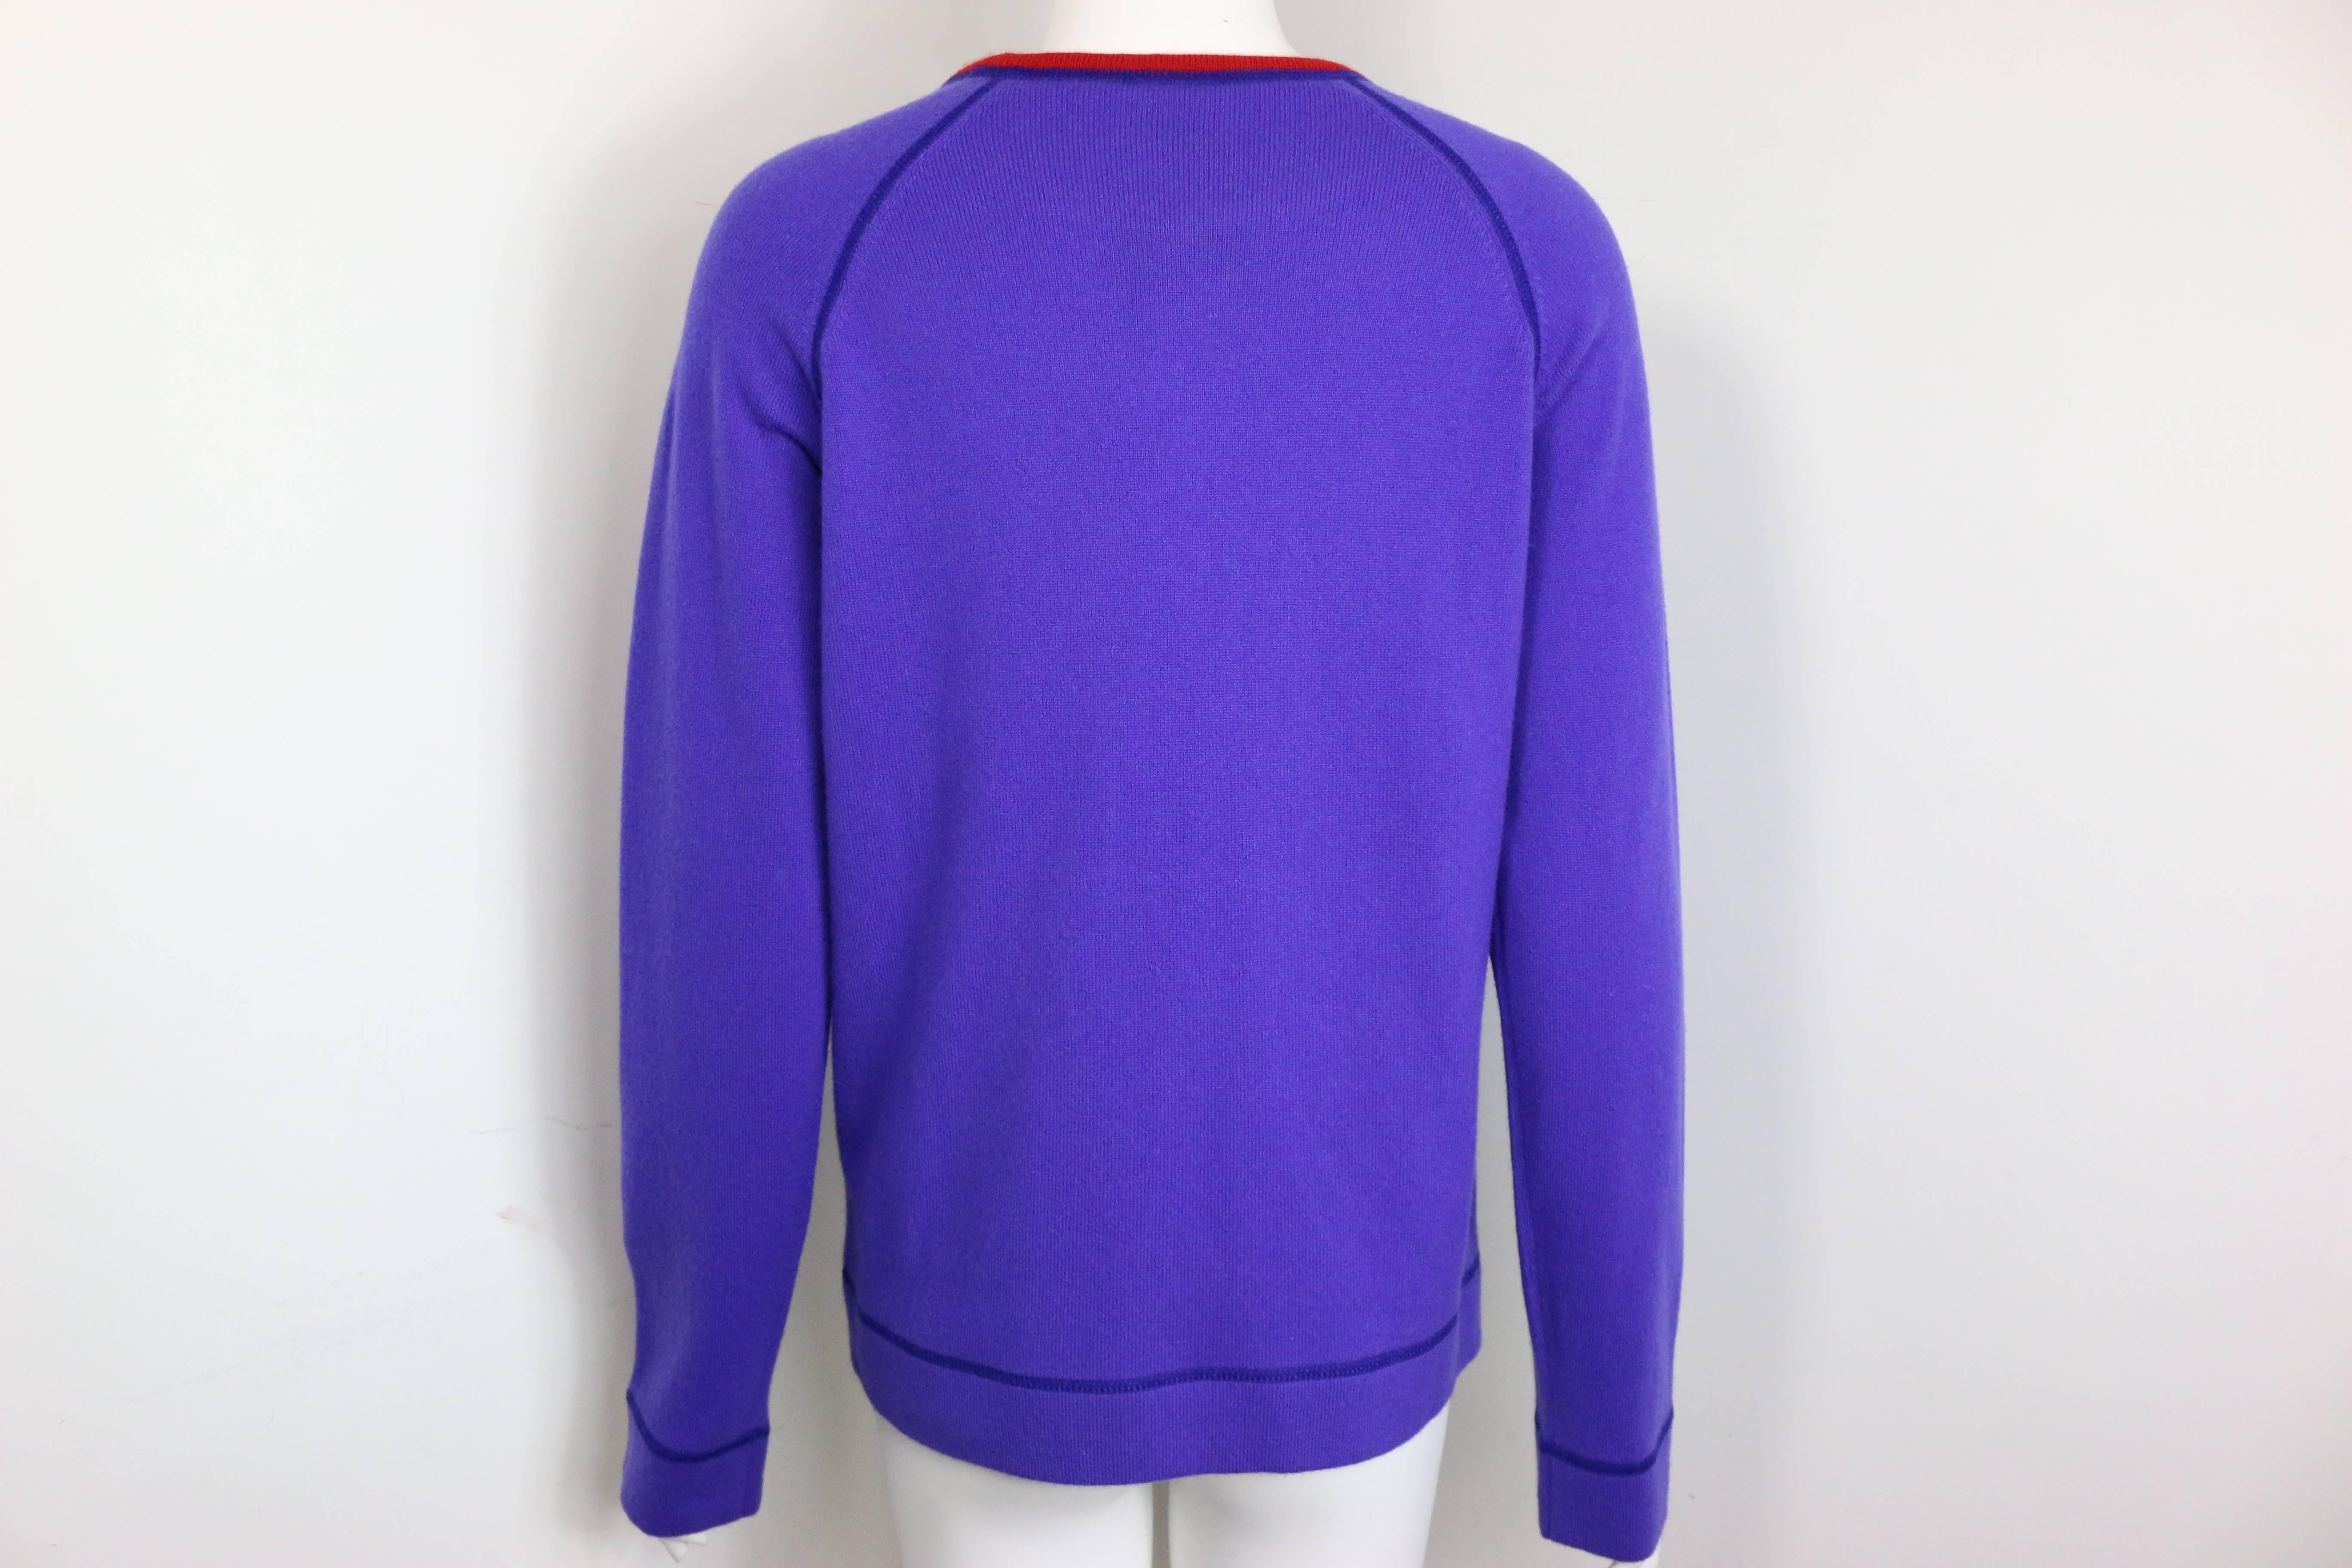 - Chanel purple with red trim collar pullover cashmere sweater from year 2008collection. 

- Featuring two side pockets, rogan sleeves and 